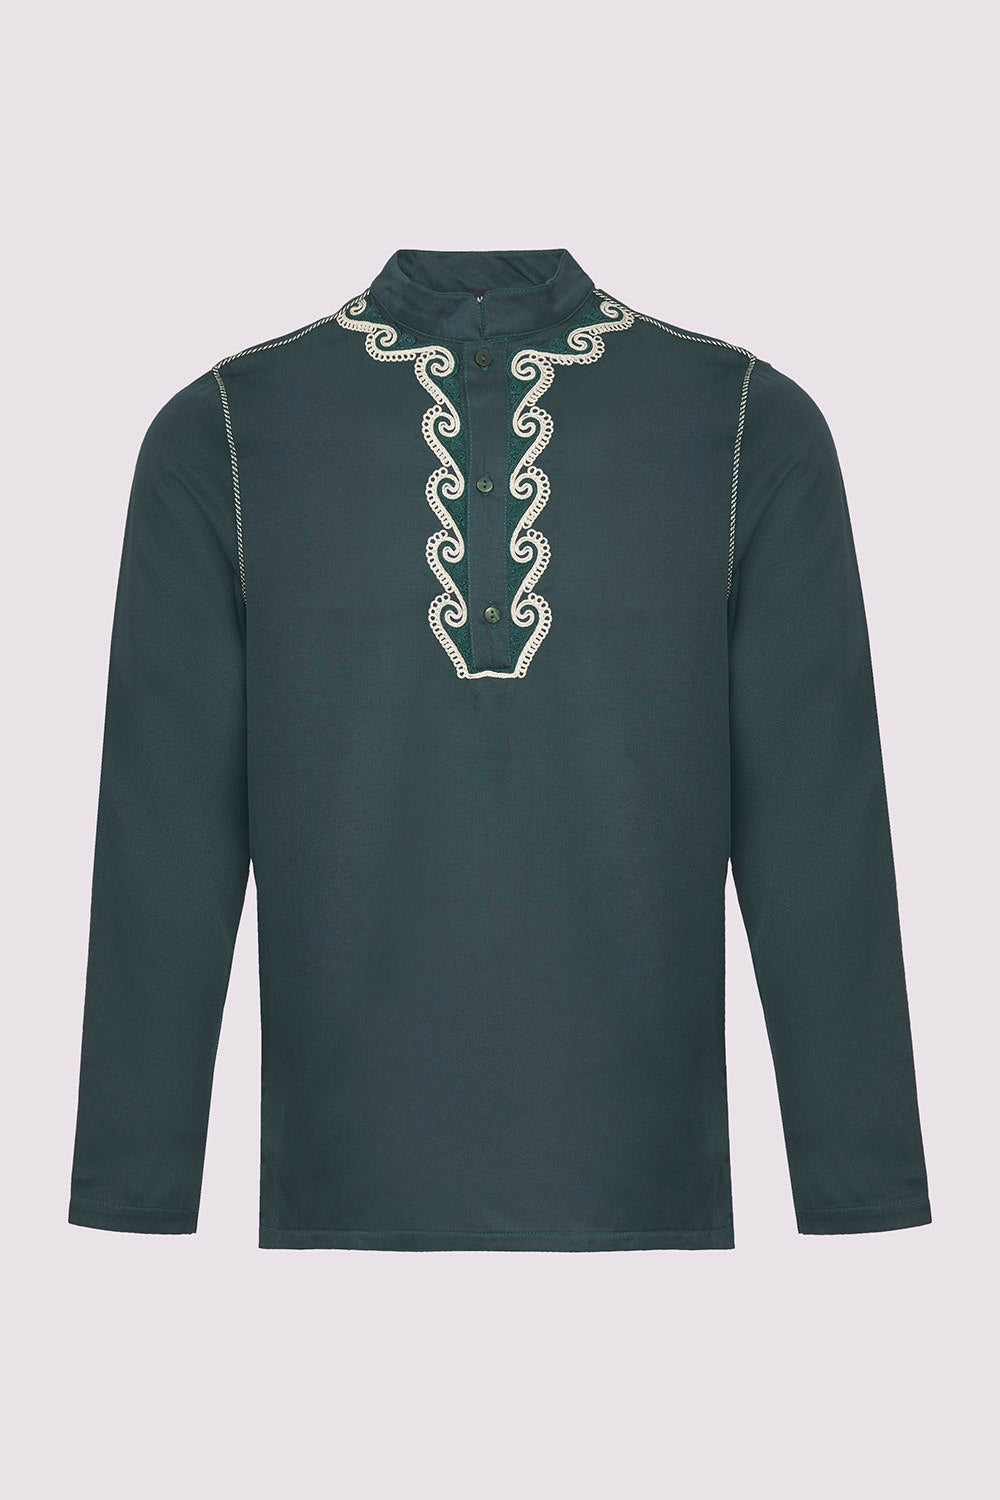 Radi Men's Long Sleeve Button-Up Embroidered Top with Stand Up Collar in Green